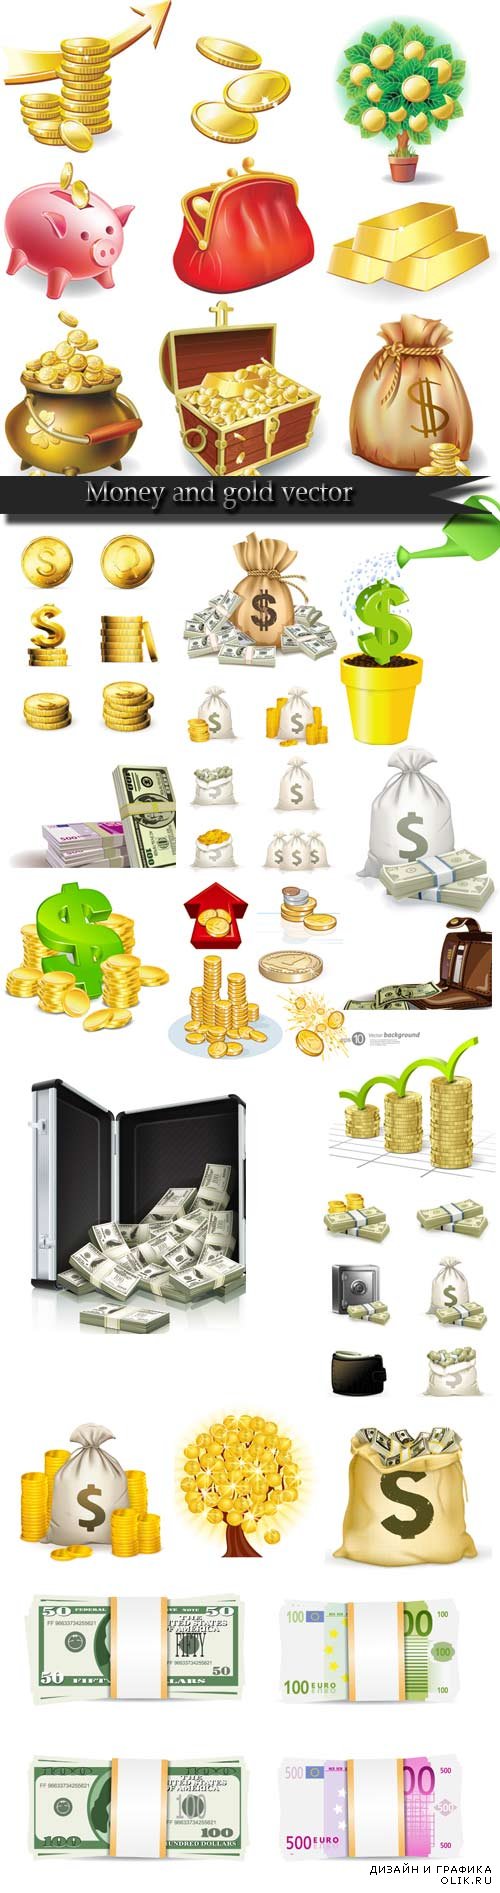 Money and gold vector